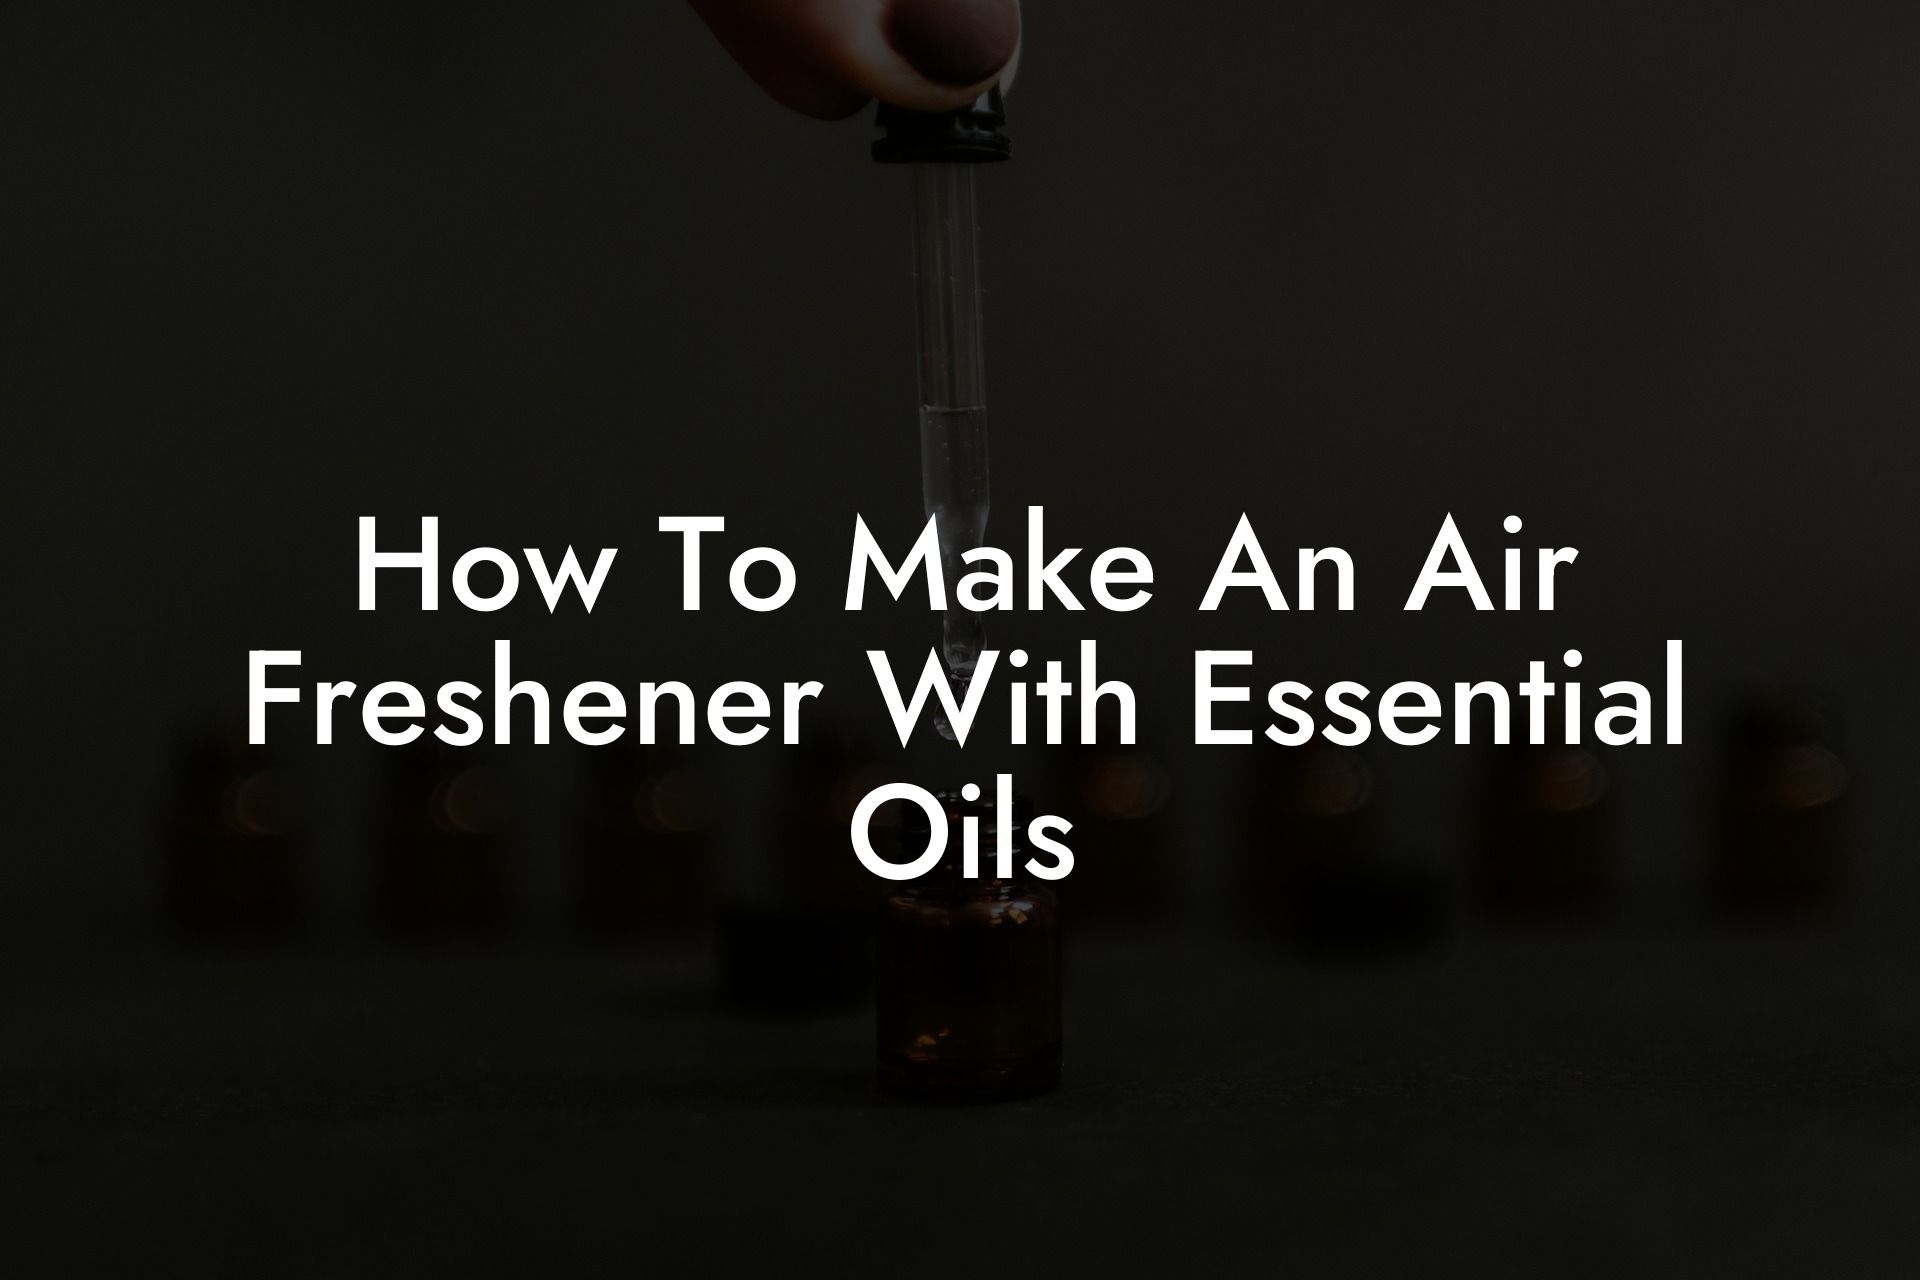 How To Make An Air Freshener With Essential Oils